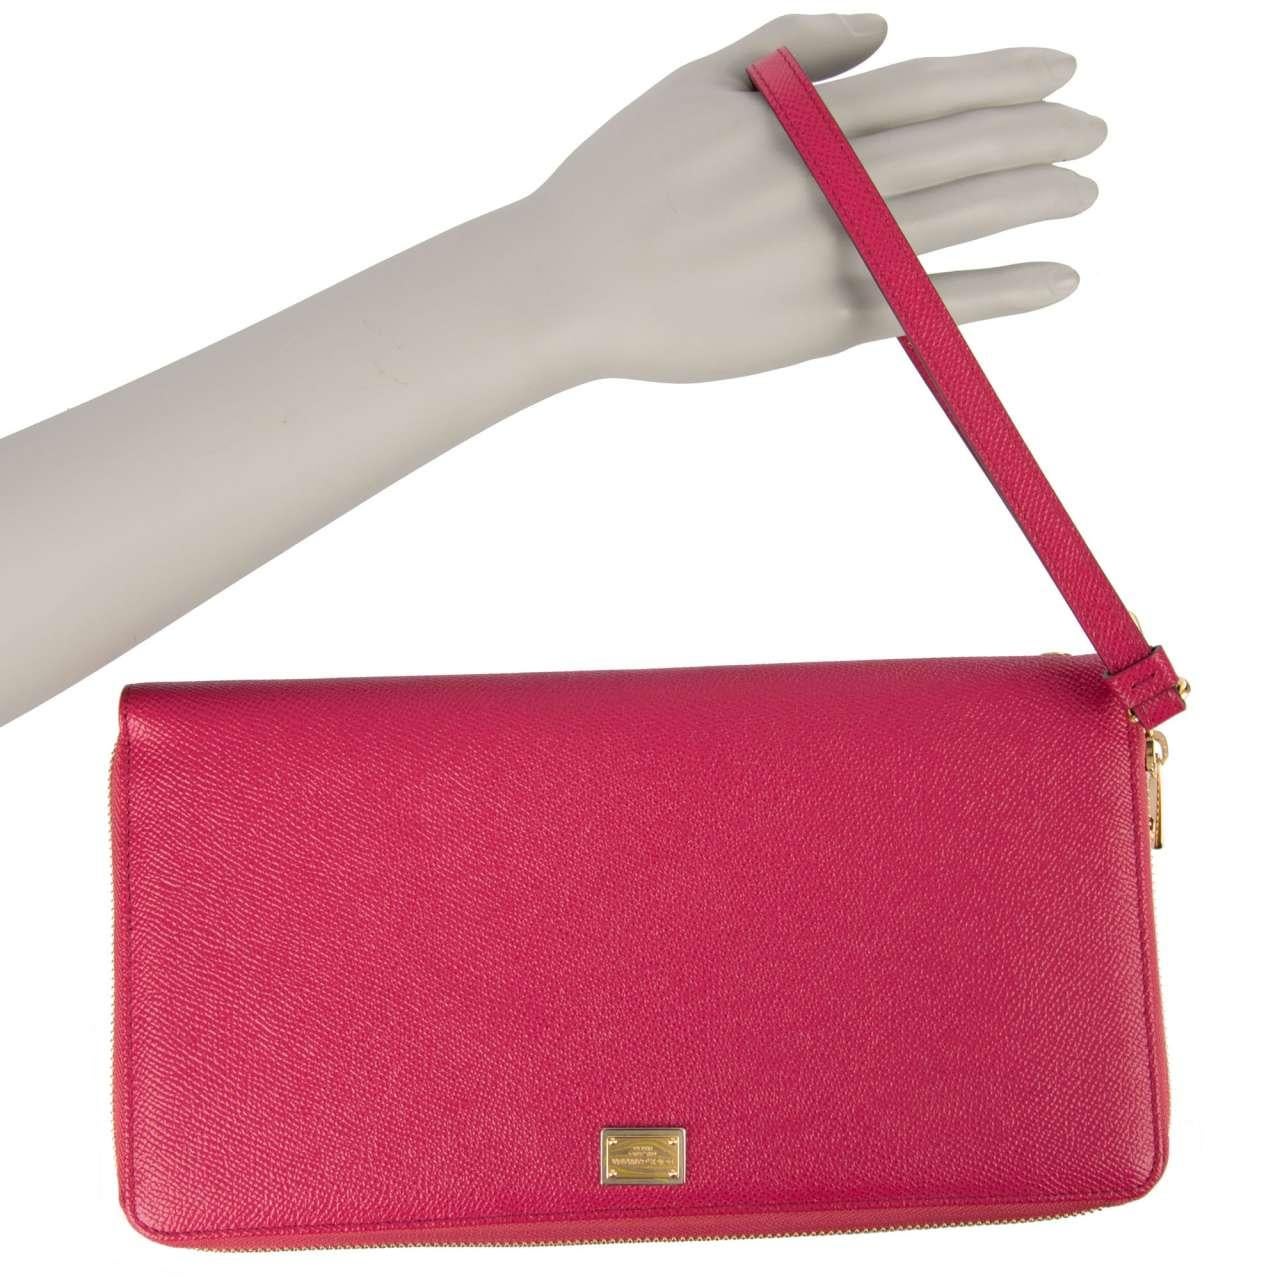 - Dauphine leather Clutch / Wallet Bag with DG logo plate in Pink by DOLCE & GABBANA - New with Tag - Former RRP: EUR 795 - Material: 100% Calfskin - Interior: 4 open pockets - One additional pocket with zip closure - 19 card pockets - Engraved logo